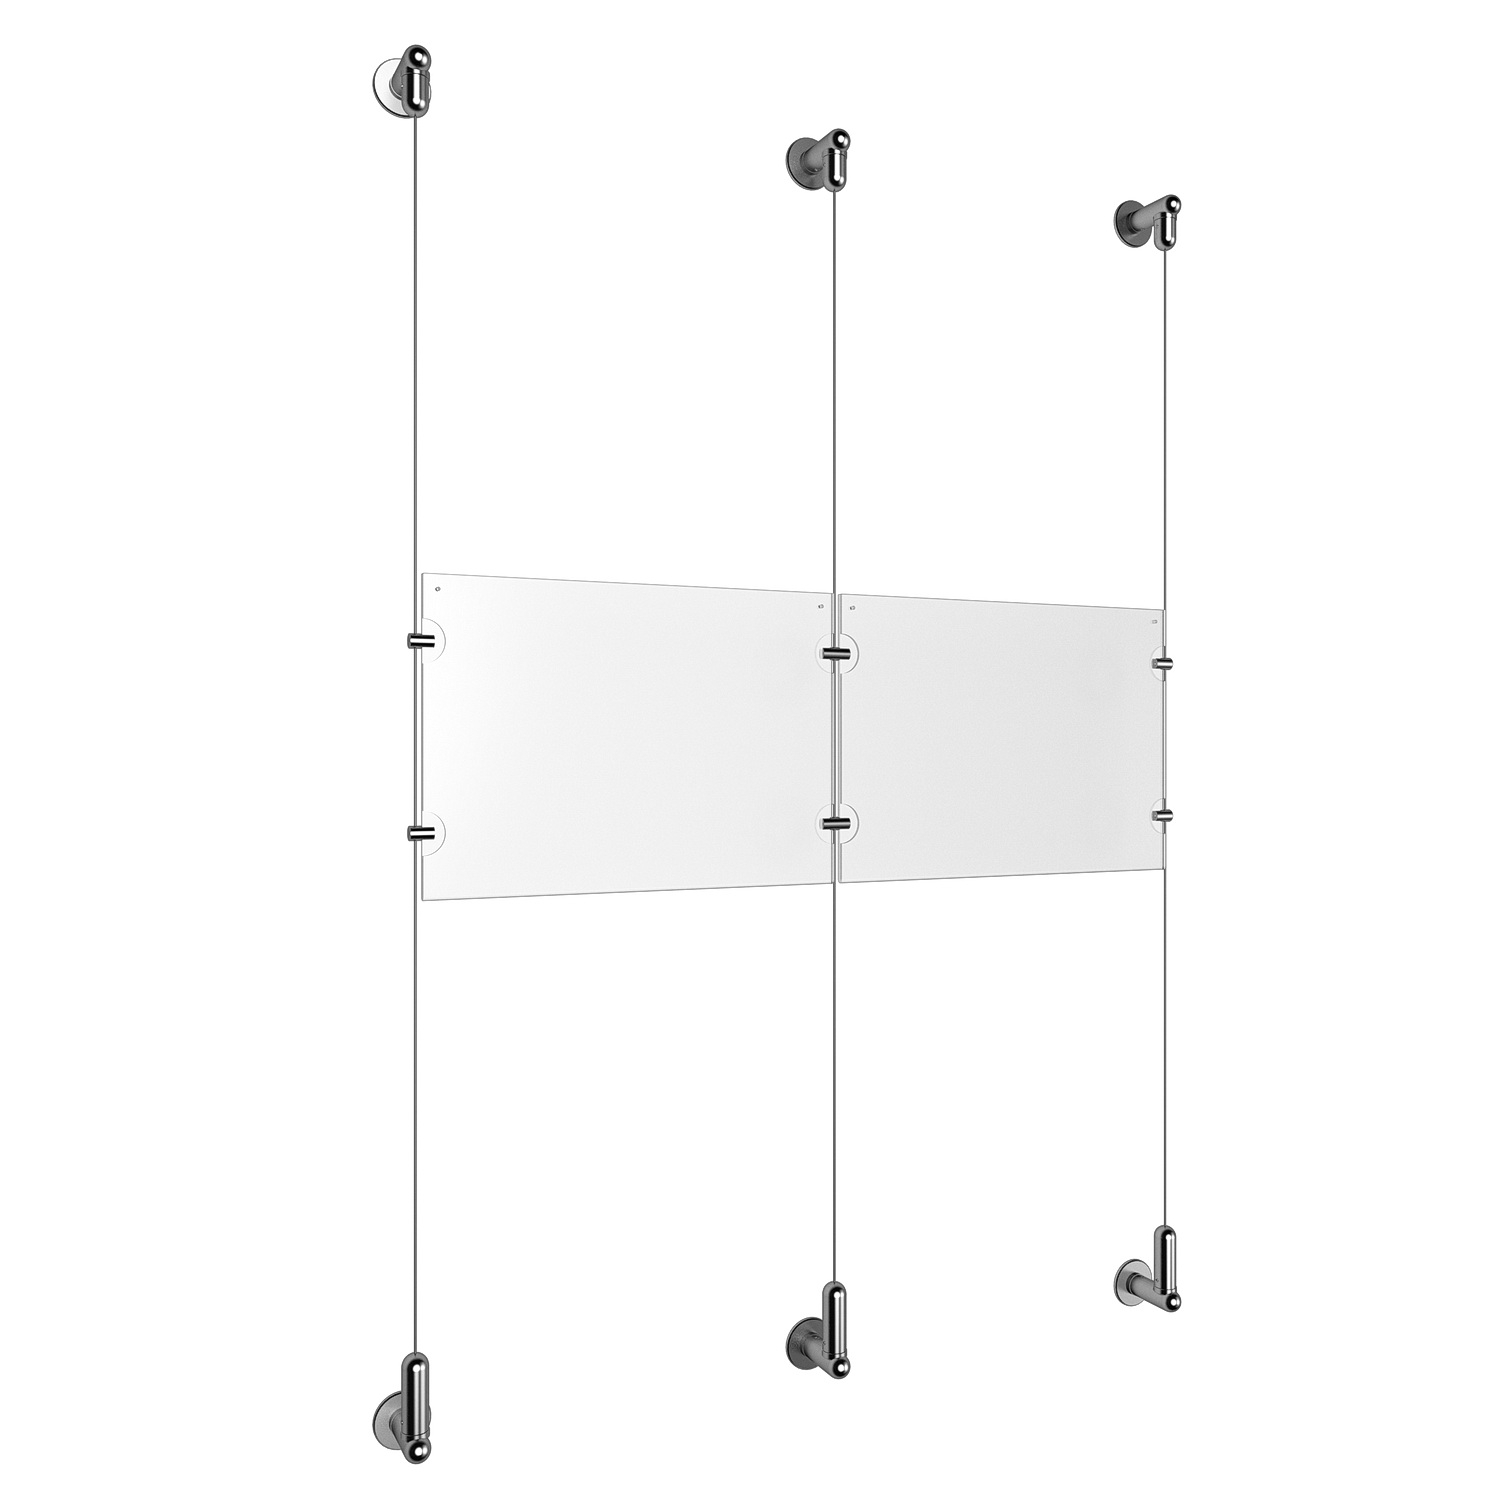 (2) 11'' Width x 8-1/2'' Height Clear Acrylic Frame & (3) Wall-to-Wall Aluminum Clear Anodized Cable Systems with (4) Single-Sided Panel Grippers (2) Double-Sided Panel Grippers